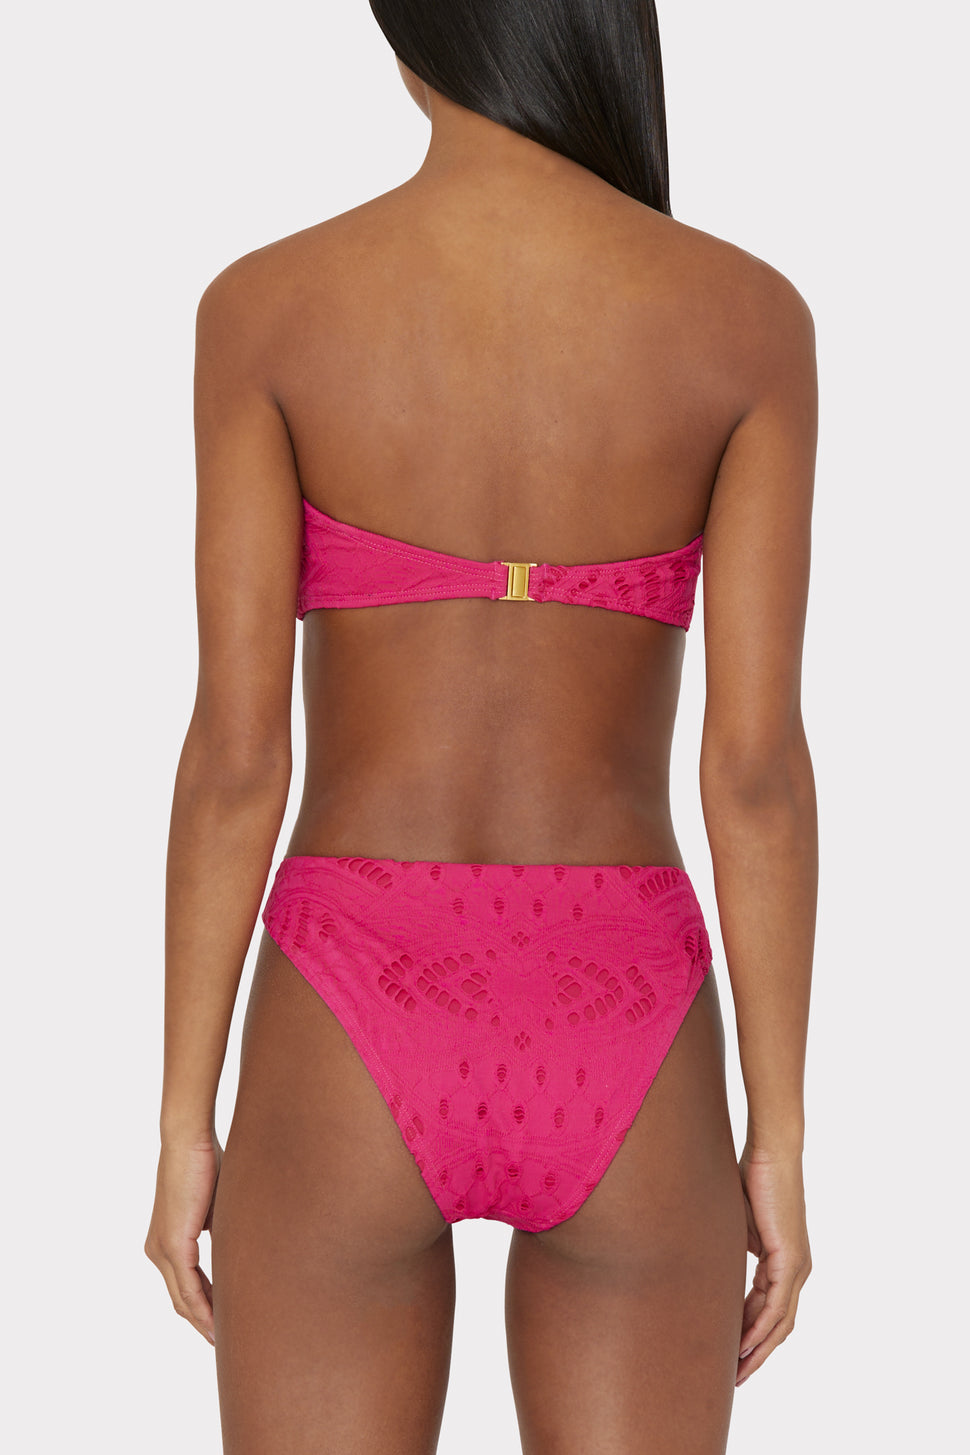 MILLY - | Pink Lace in MILLY Eyelet In Bikini Pink Bandeau Top